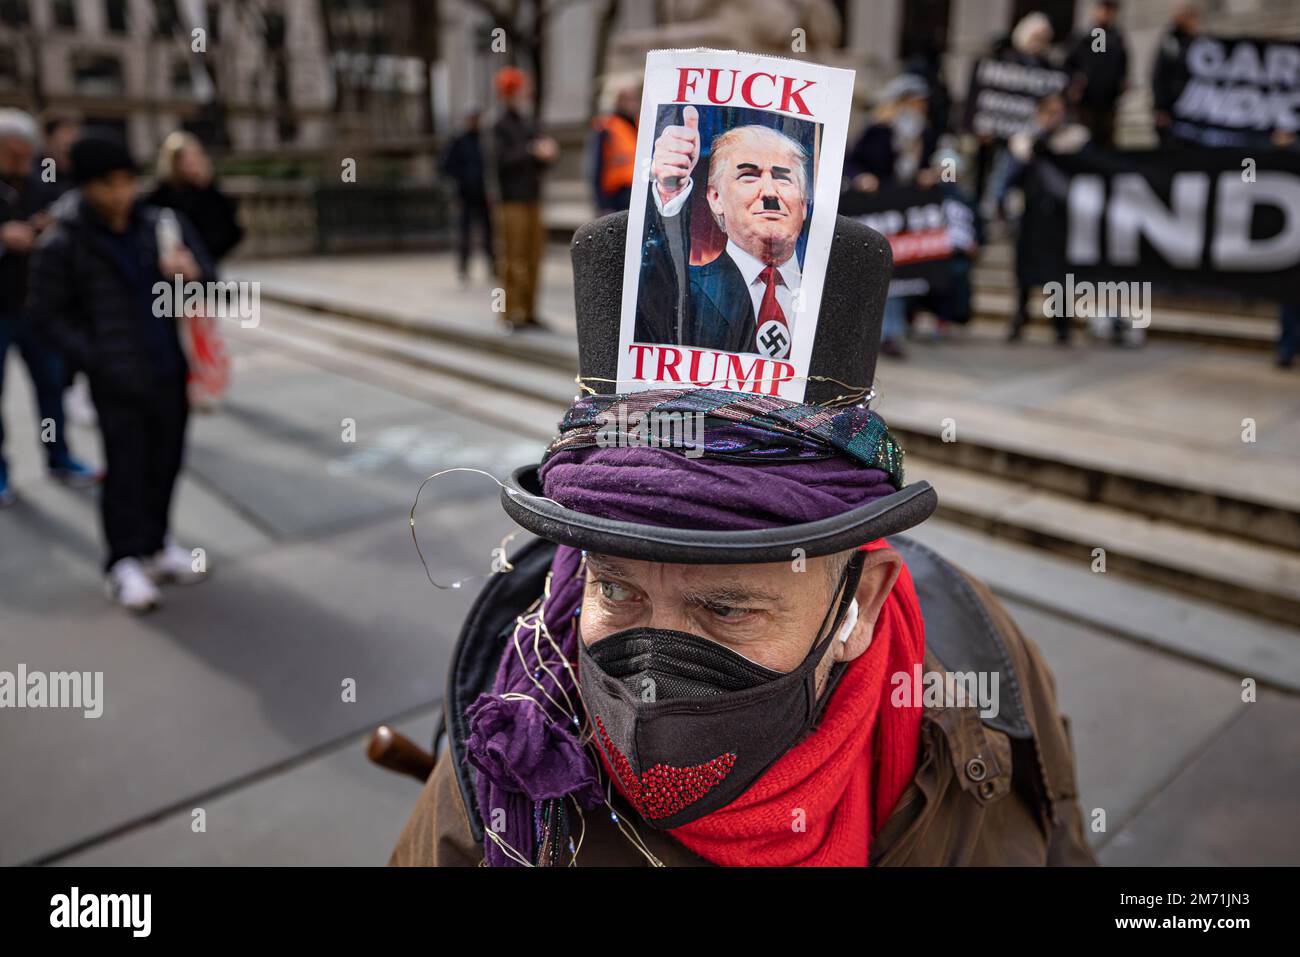 New York City, United States. 06th Jan, 2023. NEW YORK, NEW YORK - JANUARY 6: A protester wearing an anti-Trump hat near the steps of the New York Public Library on the second anniversary of the attack on the US Capitol on January 6, 2023 in New York City. Over 900 people, primarily Trump supporters and far-right extremists, have been charged in an attempt to prevent Congress from certifying Joe Biden's electoral victory in 2020. (Photo by Michael Nigro/Sipa USA) Credit: Sipa USA/Alamy Live News Stock Photo